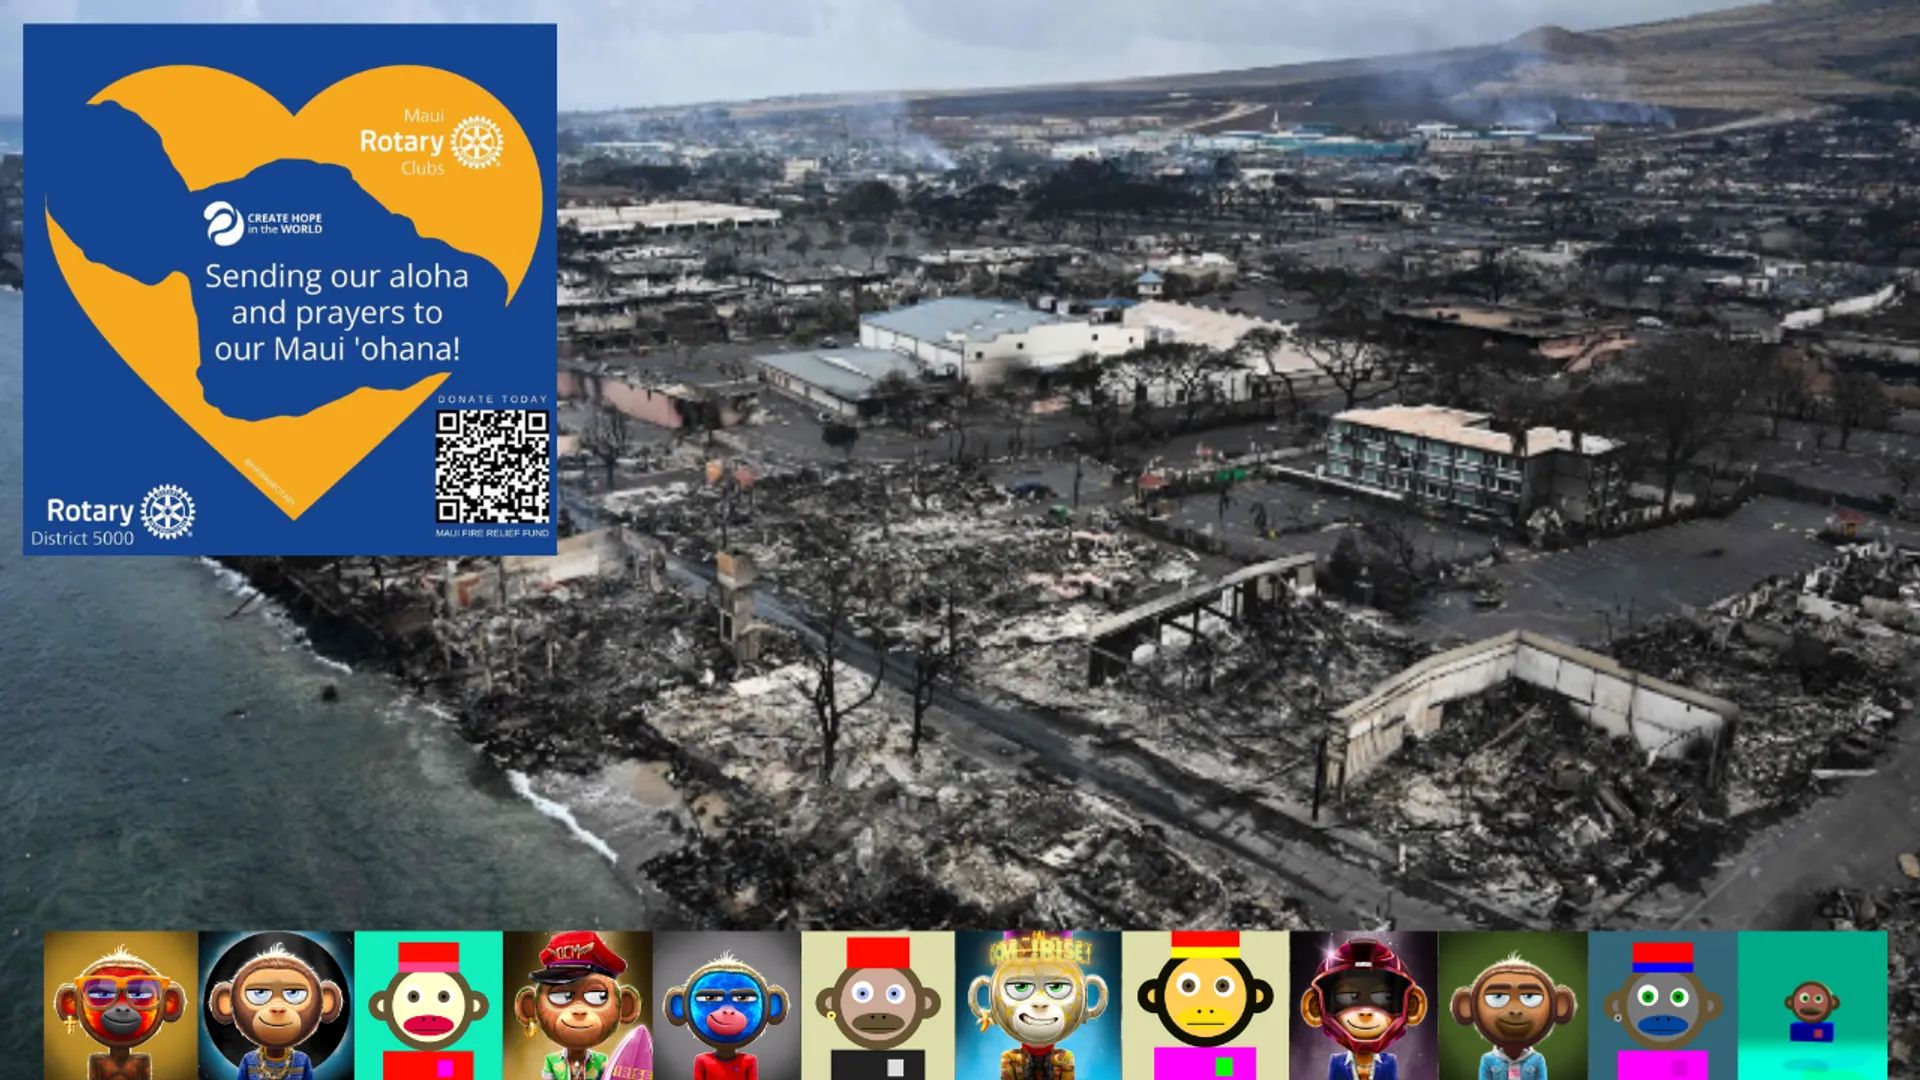 I’m proud of our OnChainMonkey web3 community for stepping up and helping Maui fire victims-- and we're just getting started 💜🌴. Please see the full post on Medium with more info, screenshots and links. !RISE  Thanks!  https://mitchjackson.medium.com/im-proud-of-our-onchainmonkey-web3-community-for-helping-maui-fire-victims-b7fe02f3d6ed